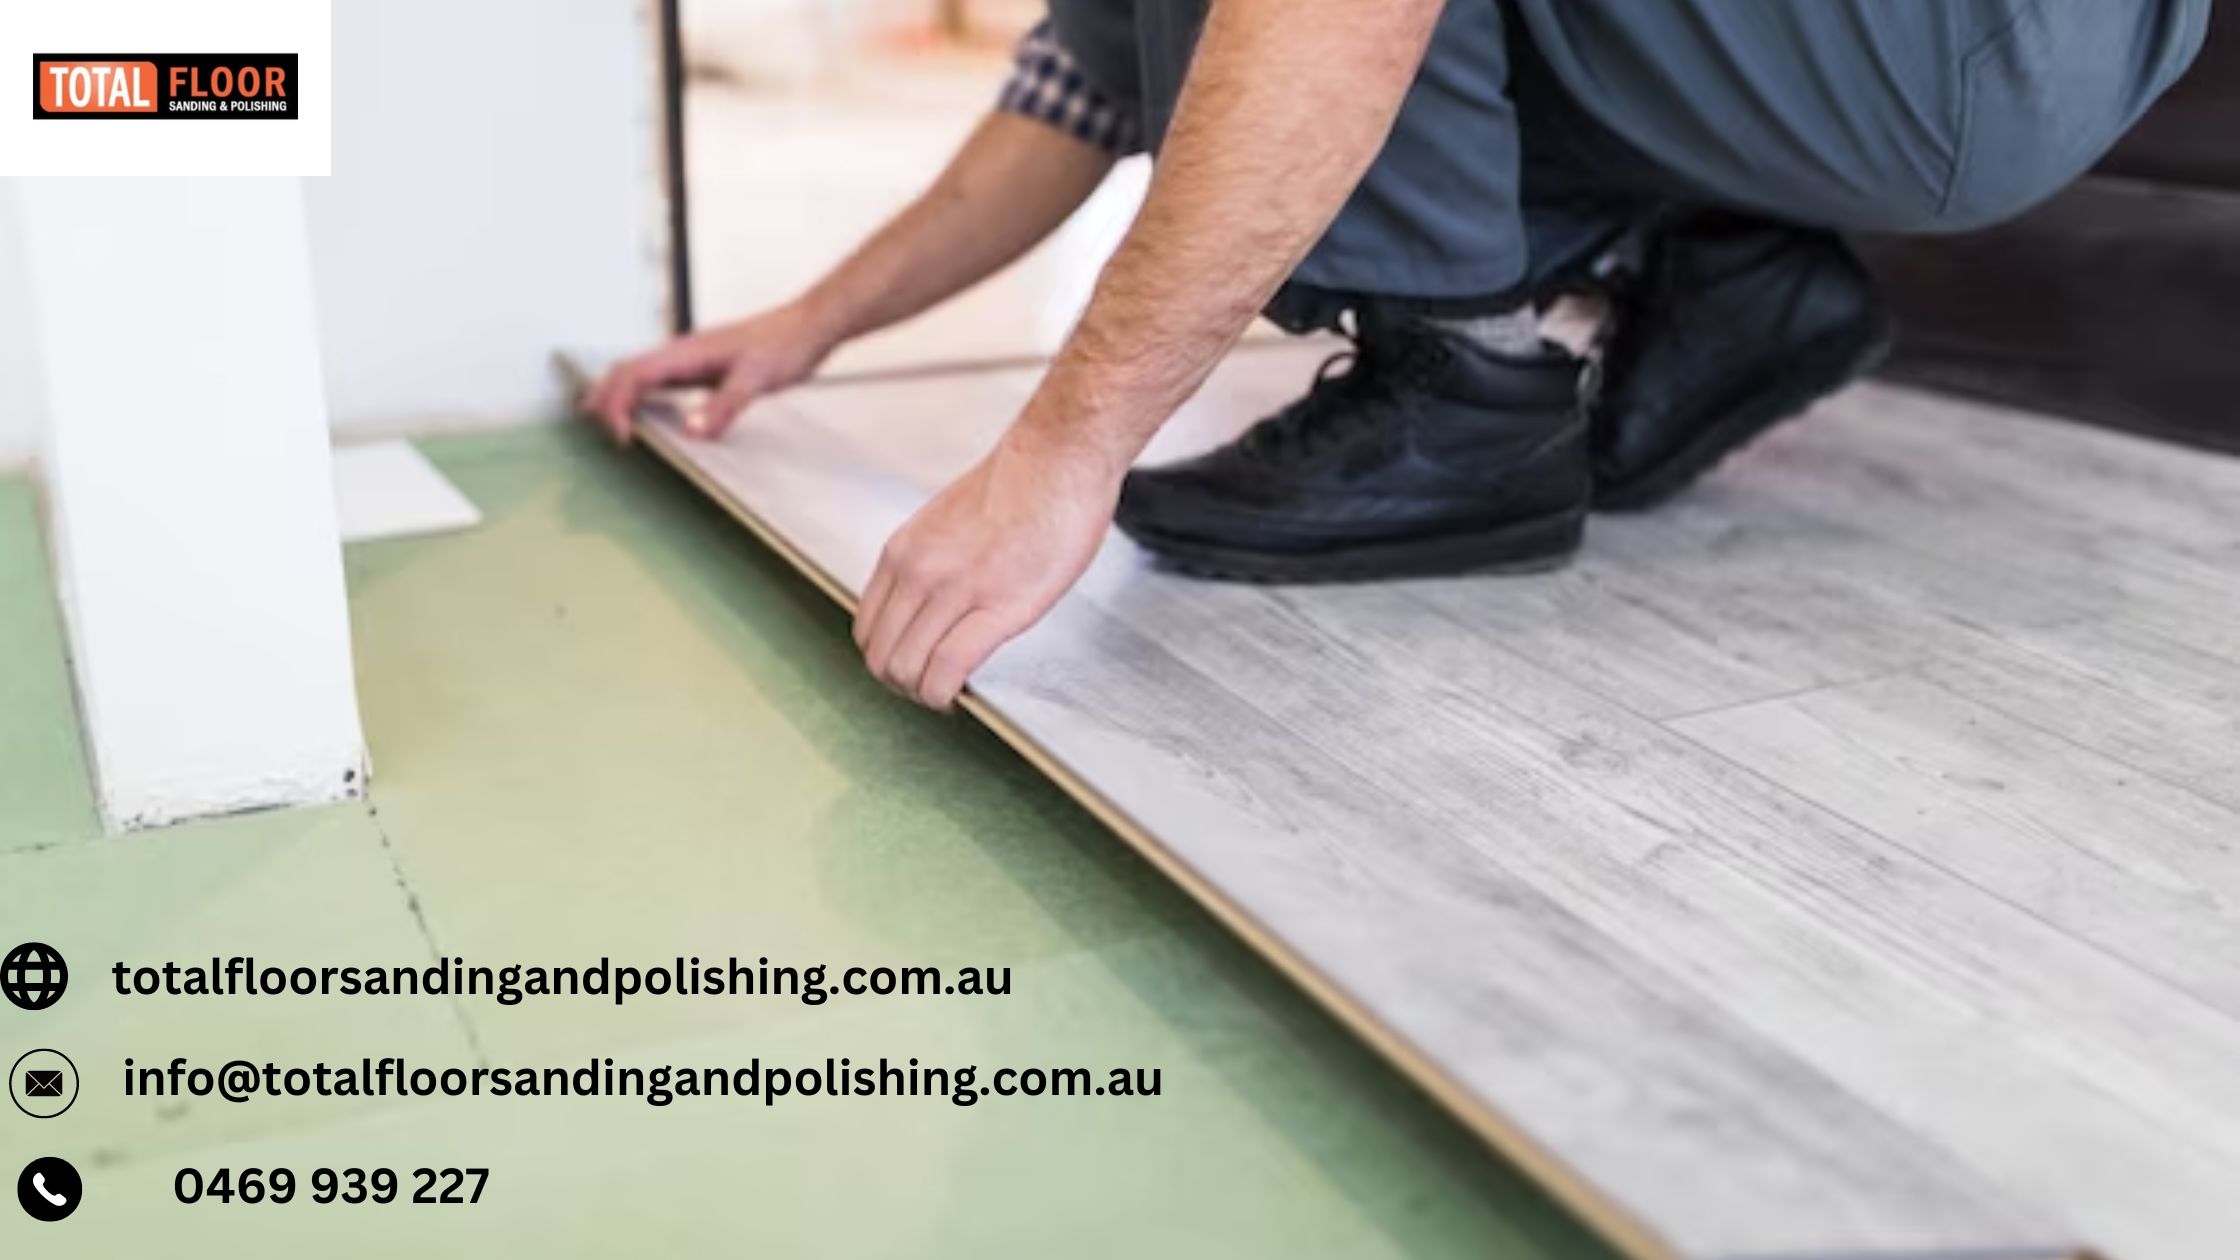 Boost Your Property’s Value with Professional Floor Polishing Services in Melbourne